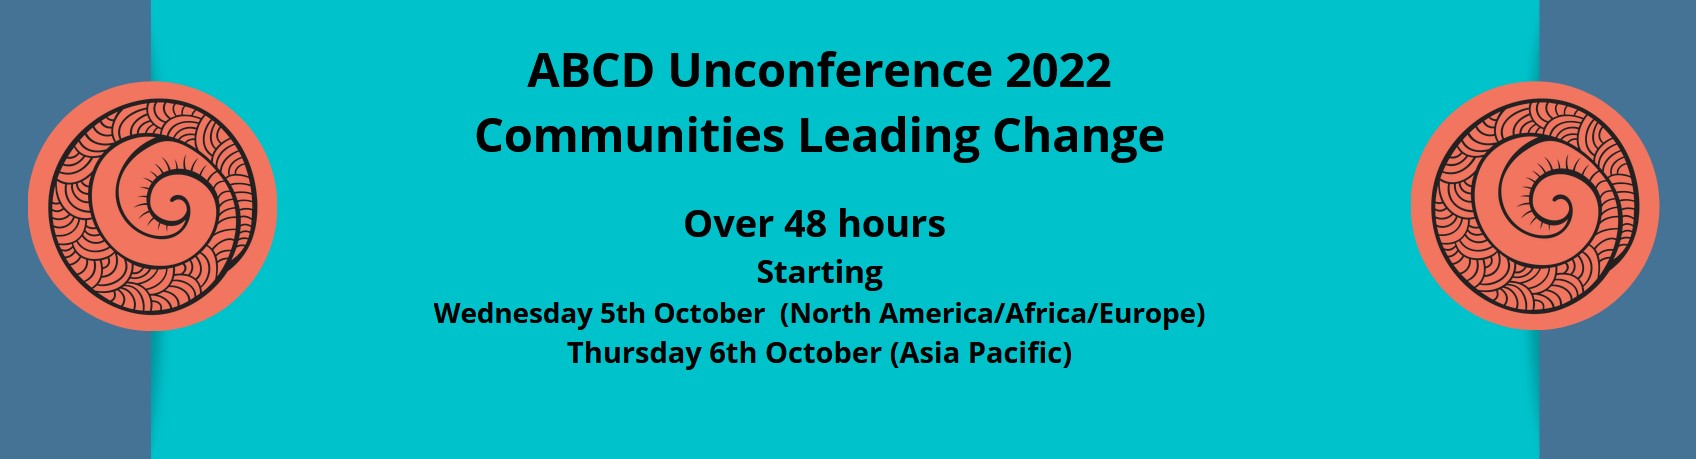 2022 ABCD Unconference